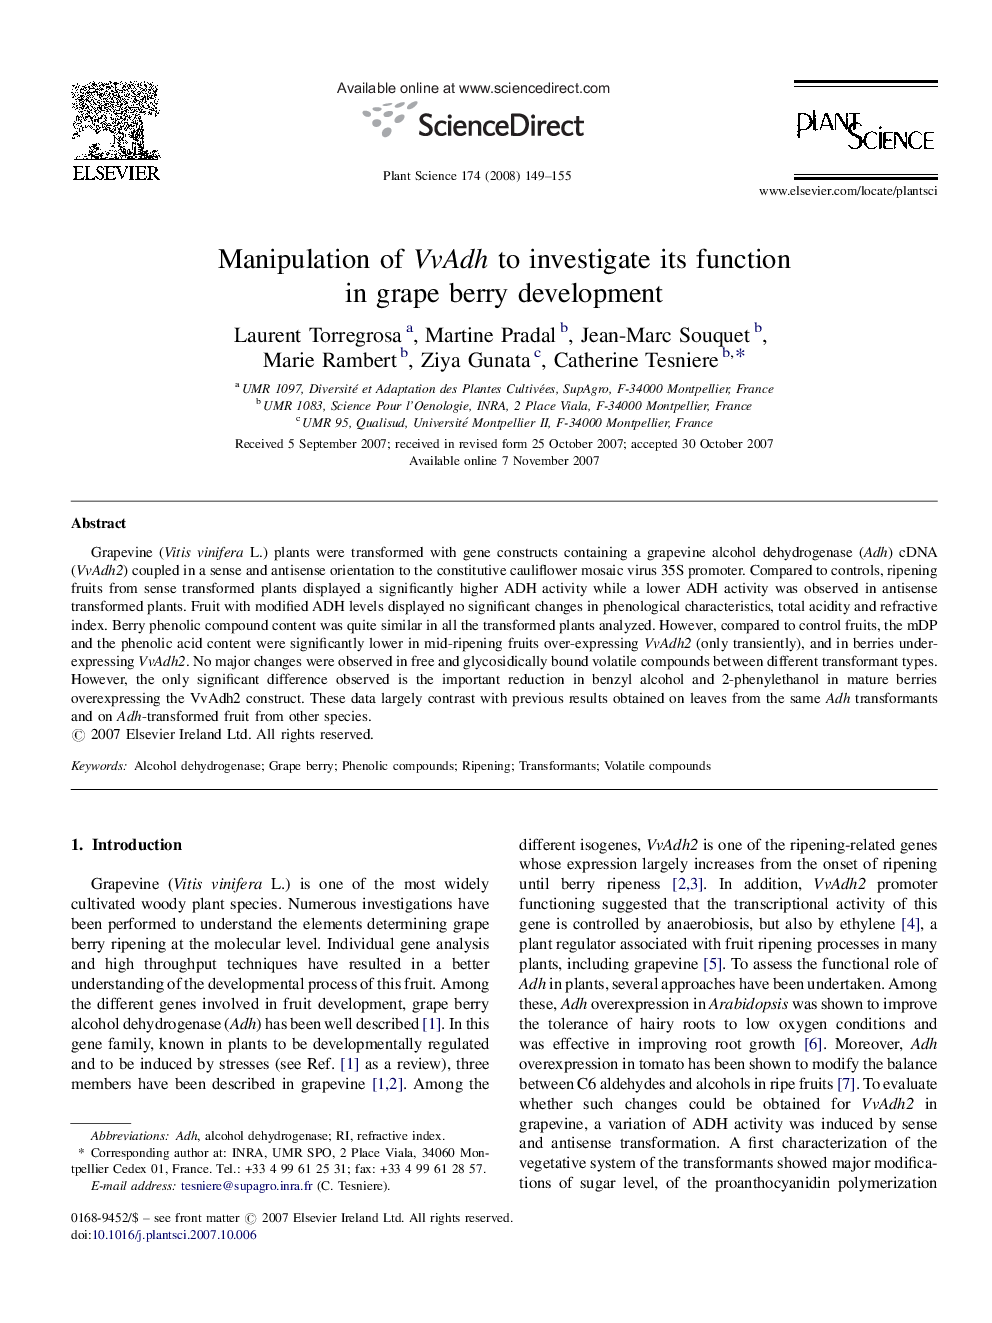 Manipulation of VvAdh to investigate its function in grape berry development